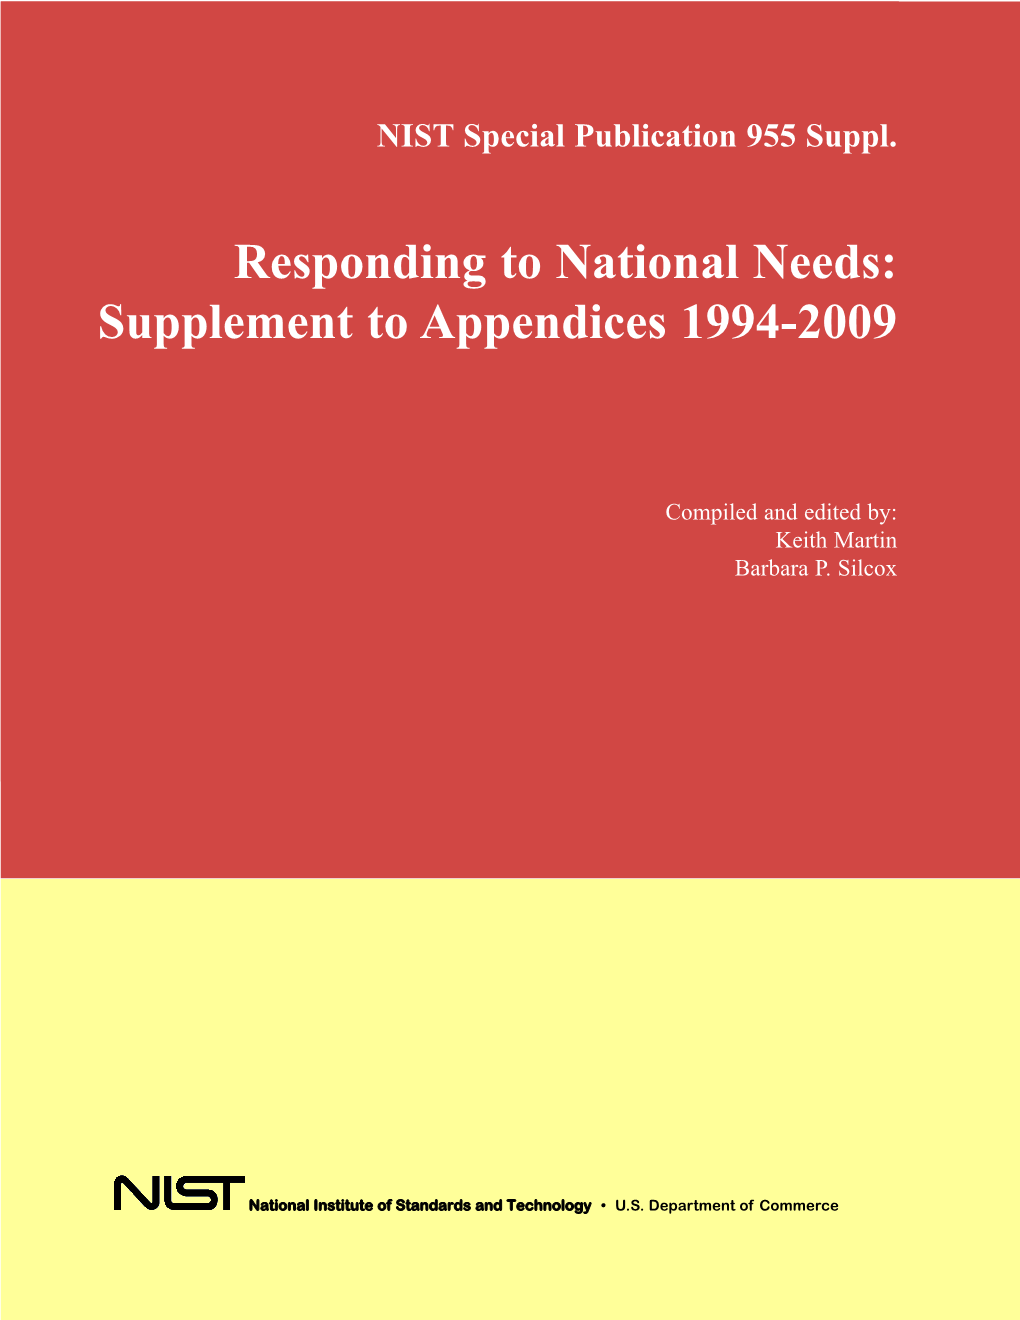 Supplement to Appendices 1994-2009